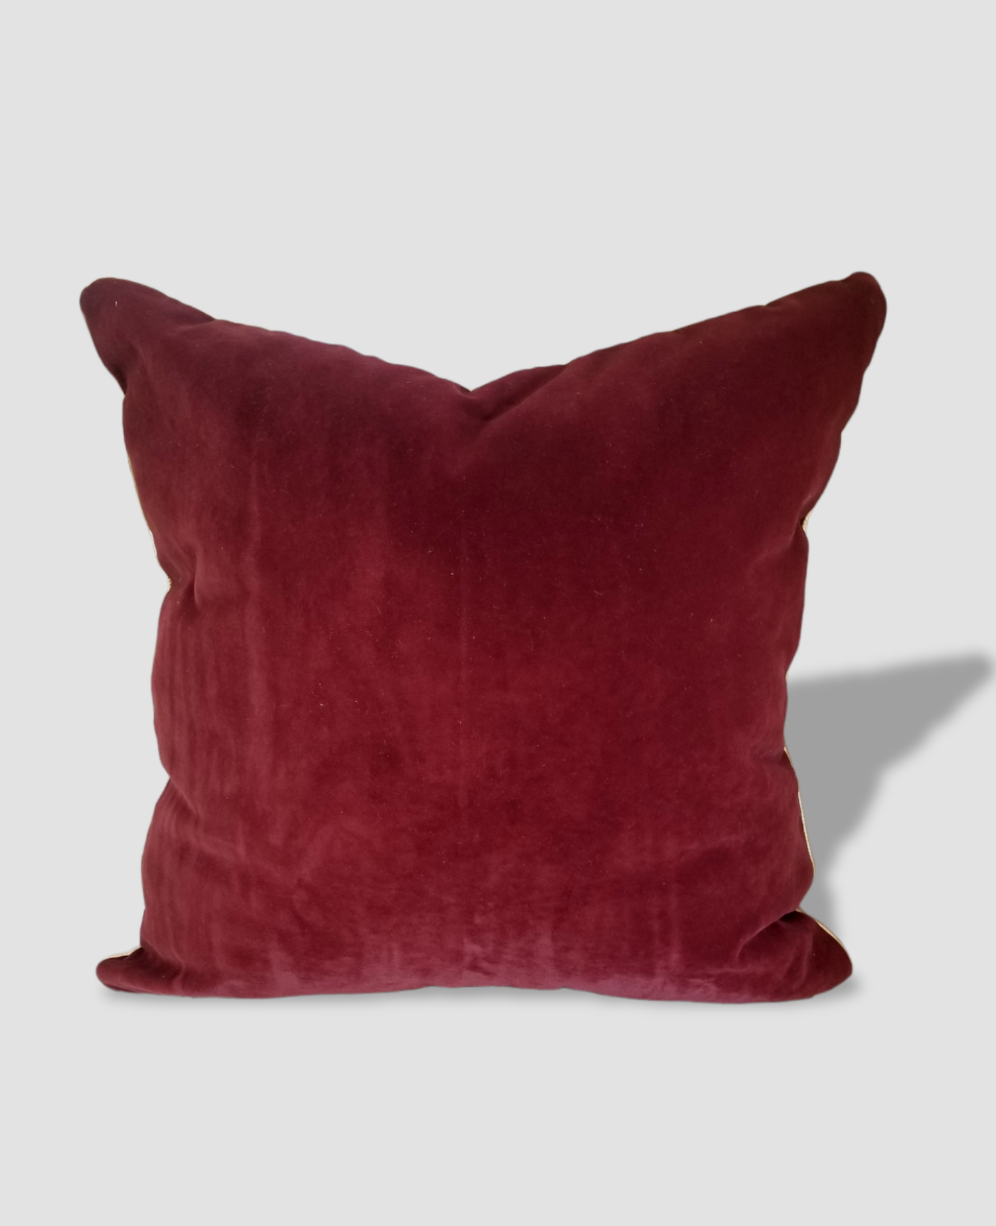 Experience glamour and comfort with this Luxury Decorative Pillow! Crafted from ultra-soft velvet or suede fabric and finished with gold piping, this pillow instantly upgrades your home with effortless sophistication. Available in Red, Black, Blue, and teal, this eye-catching piece adds a charming touch to any room.
Includes 
Pillow and Polyfill Insert 
Free International and Local Shipping Available
